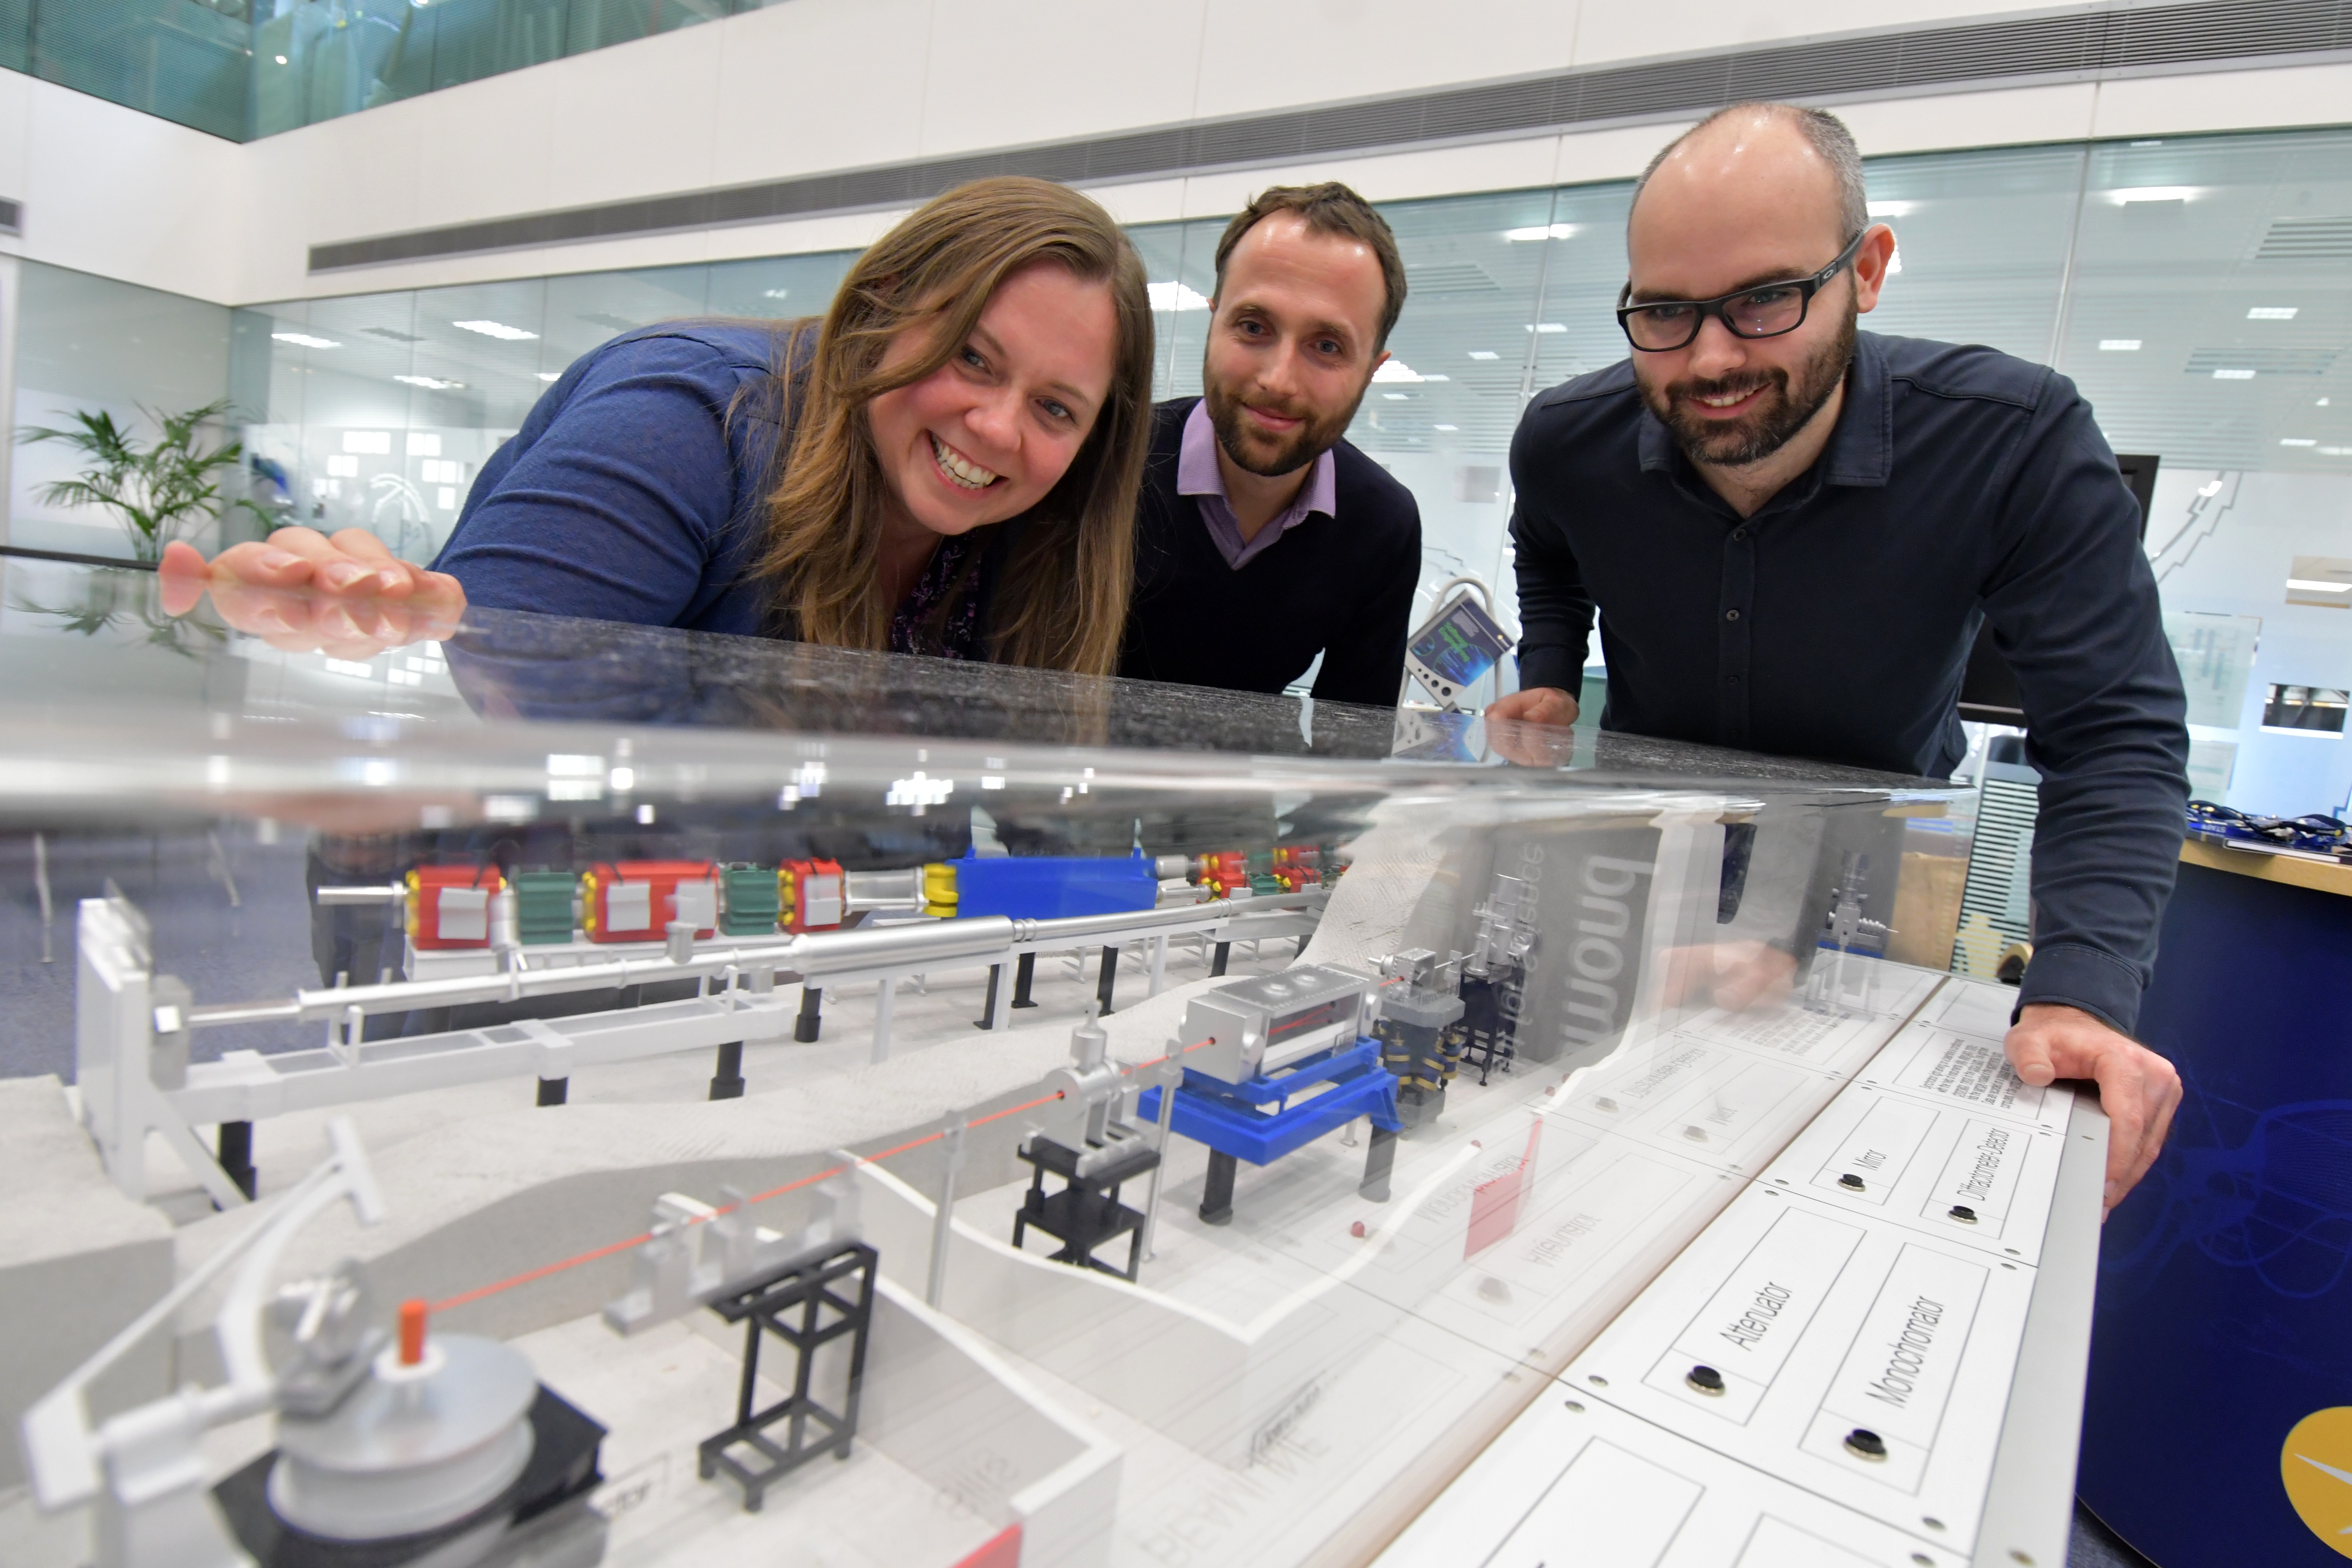 Sarah Macdonell, Giorgio Rustighini and Walter Tizzano look at a model of a beamline.